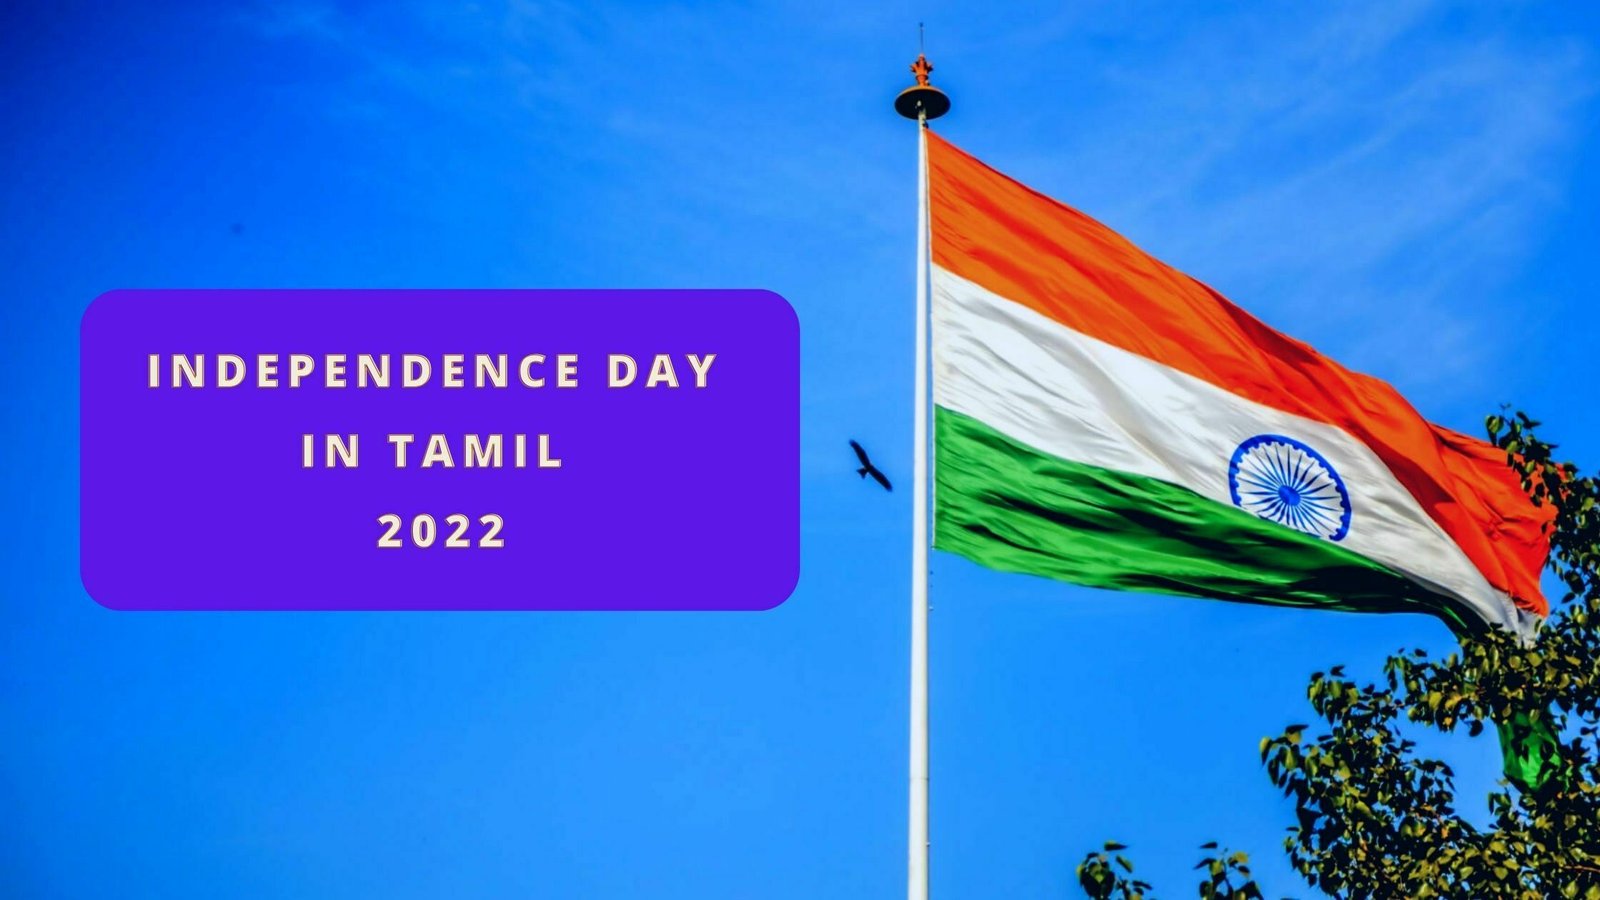 Independence day in tamil 2022